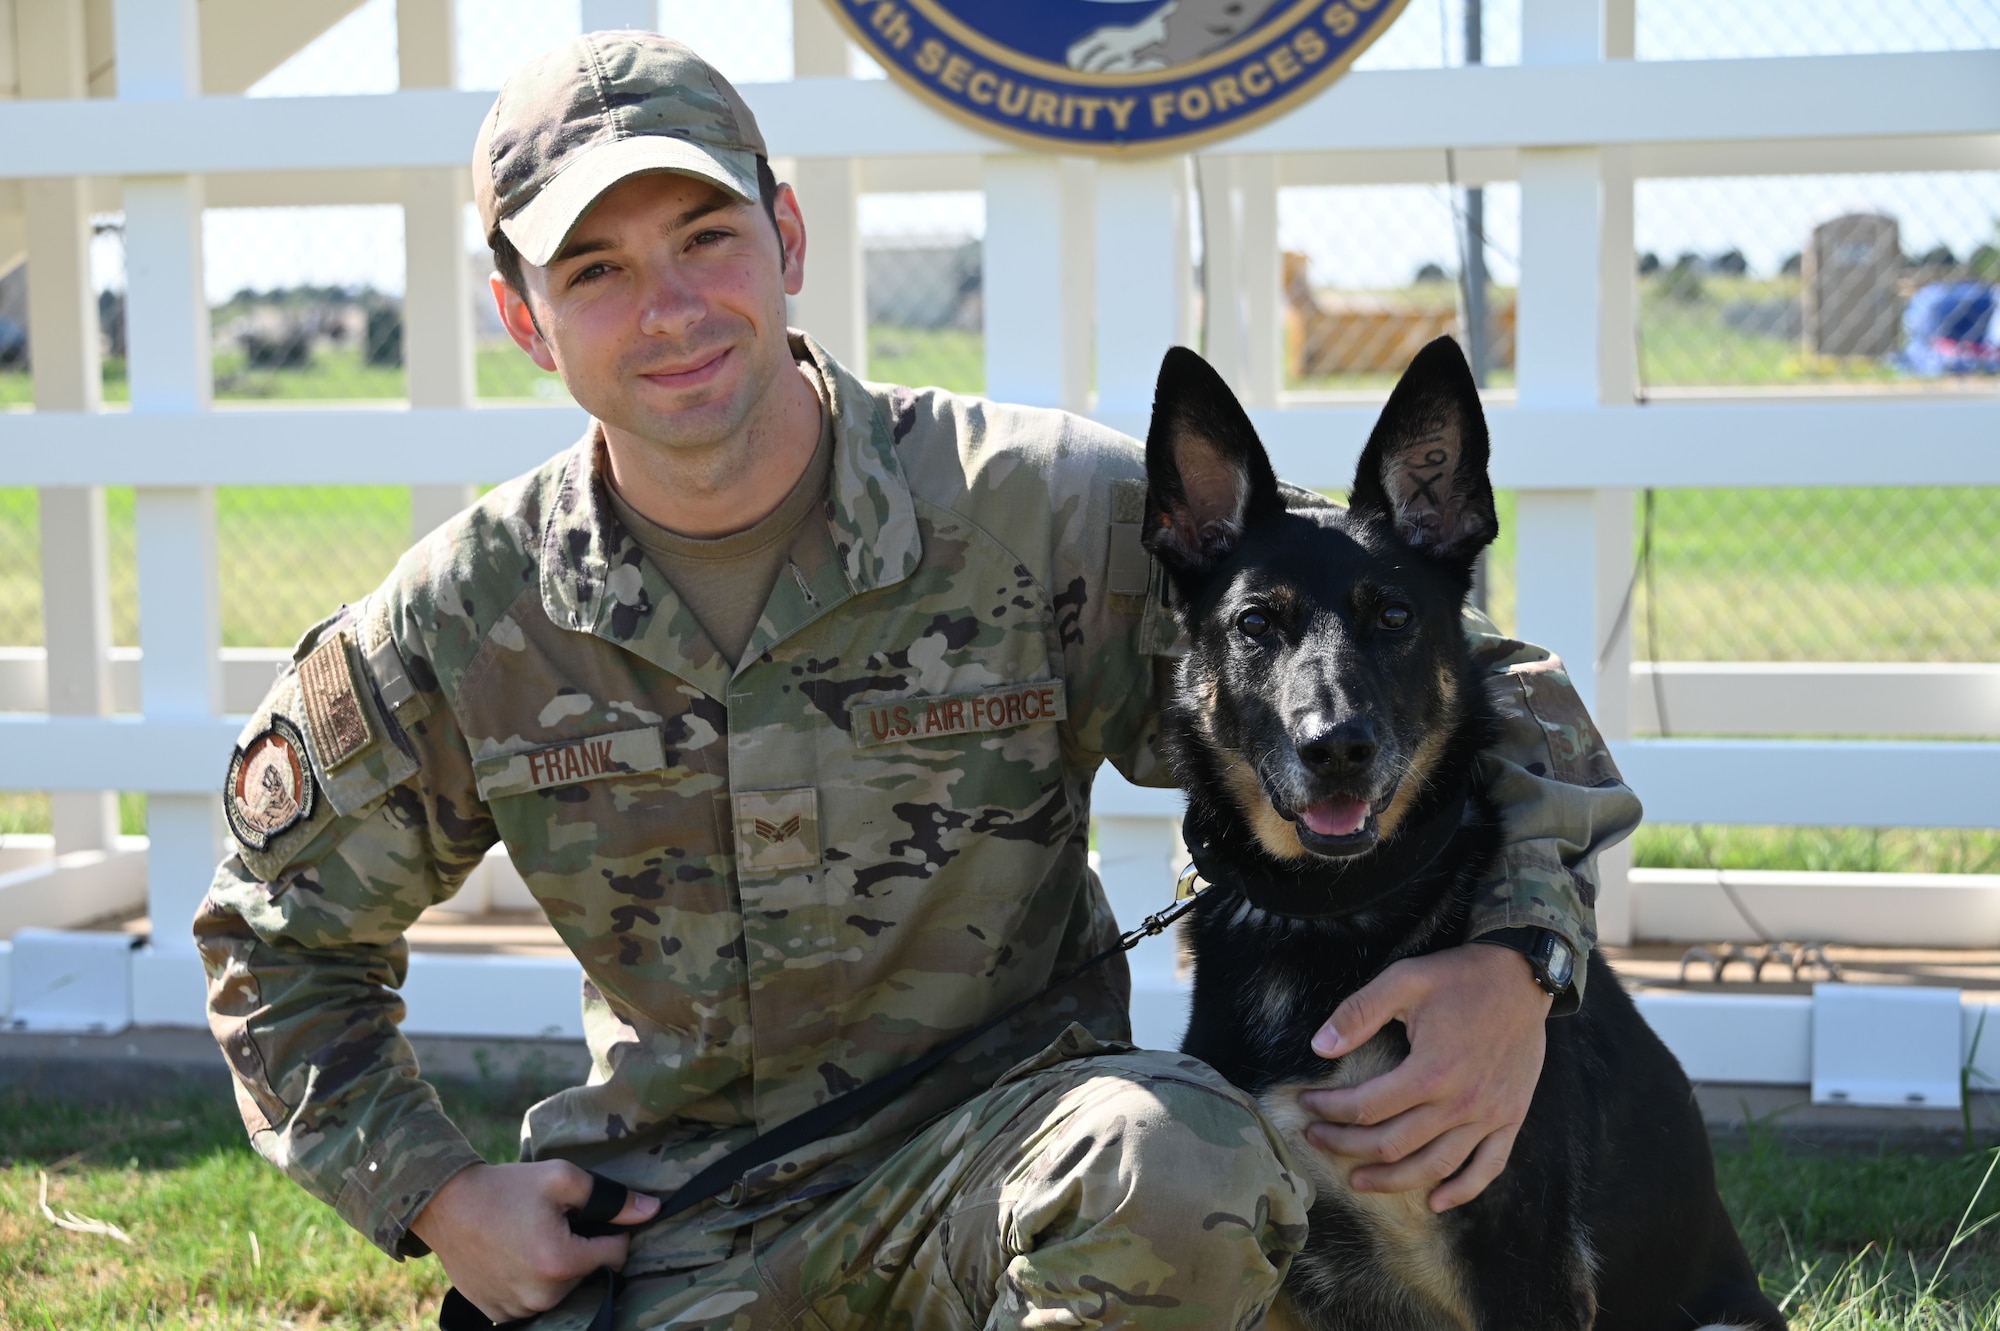 U.S. Air Force Senior Airman Trevor Frank, 97th Security Forces Squadron military working dog (MWD) handler, holds a toy in front of Cora, retired MWD, at Altus Air Force Base, Oklahoma, Sept. 9, 2022. Cora is rewarded for her training with dog toys. (U.S. Air Force photo by Senior Airman Kayla Christenson)